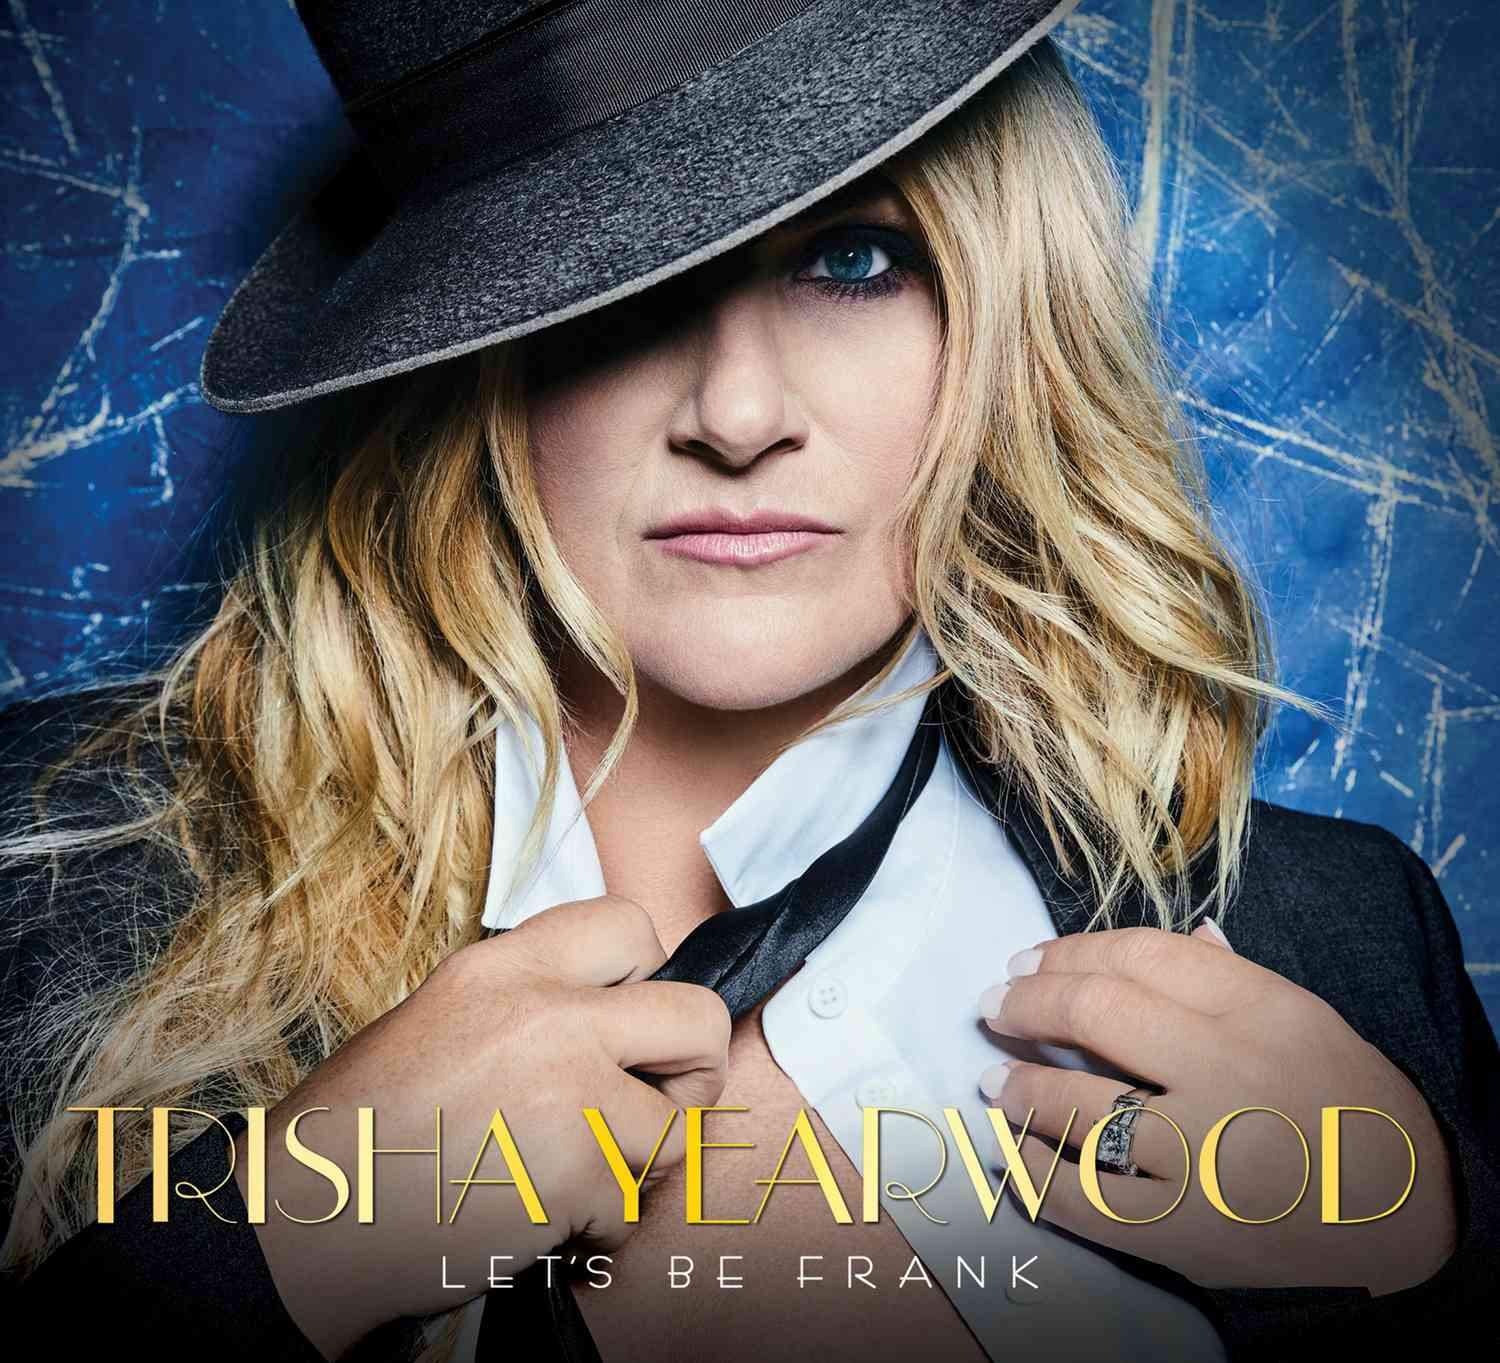 Trisha Yearwood Set to Release Frank Sinatra Cover Album Let's Be Frank